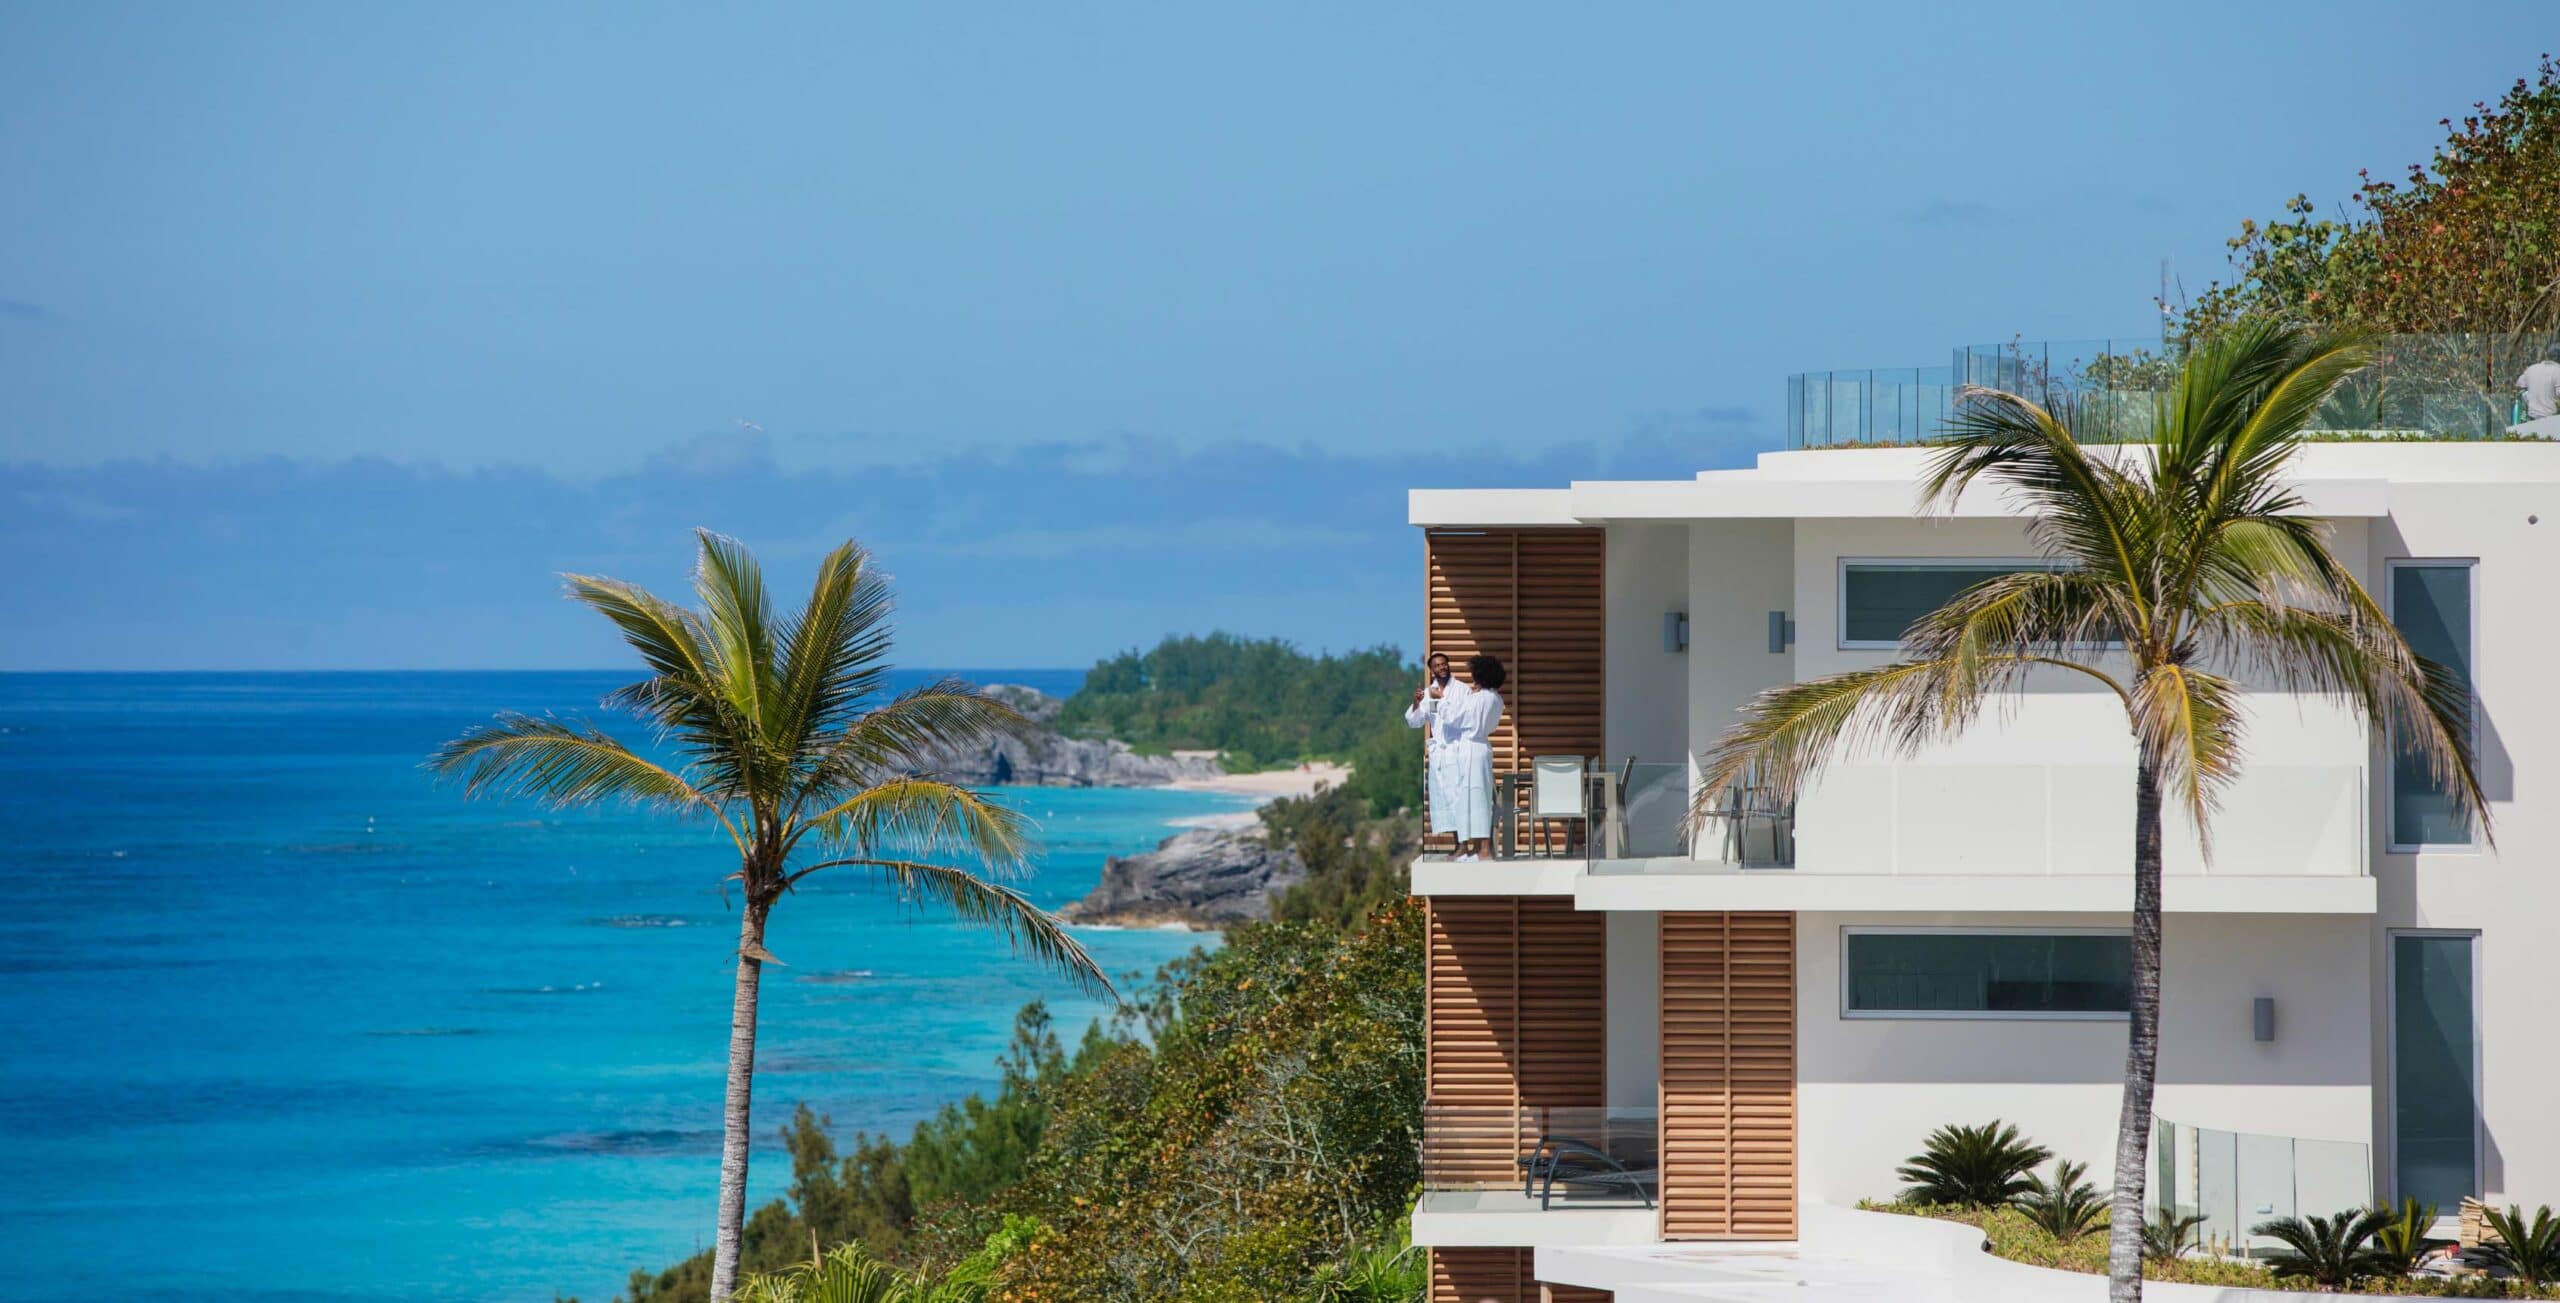 A couple on a balcony of a resort overlooking the ocean.